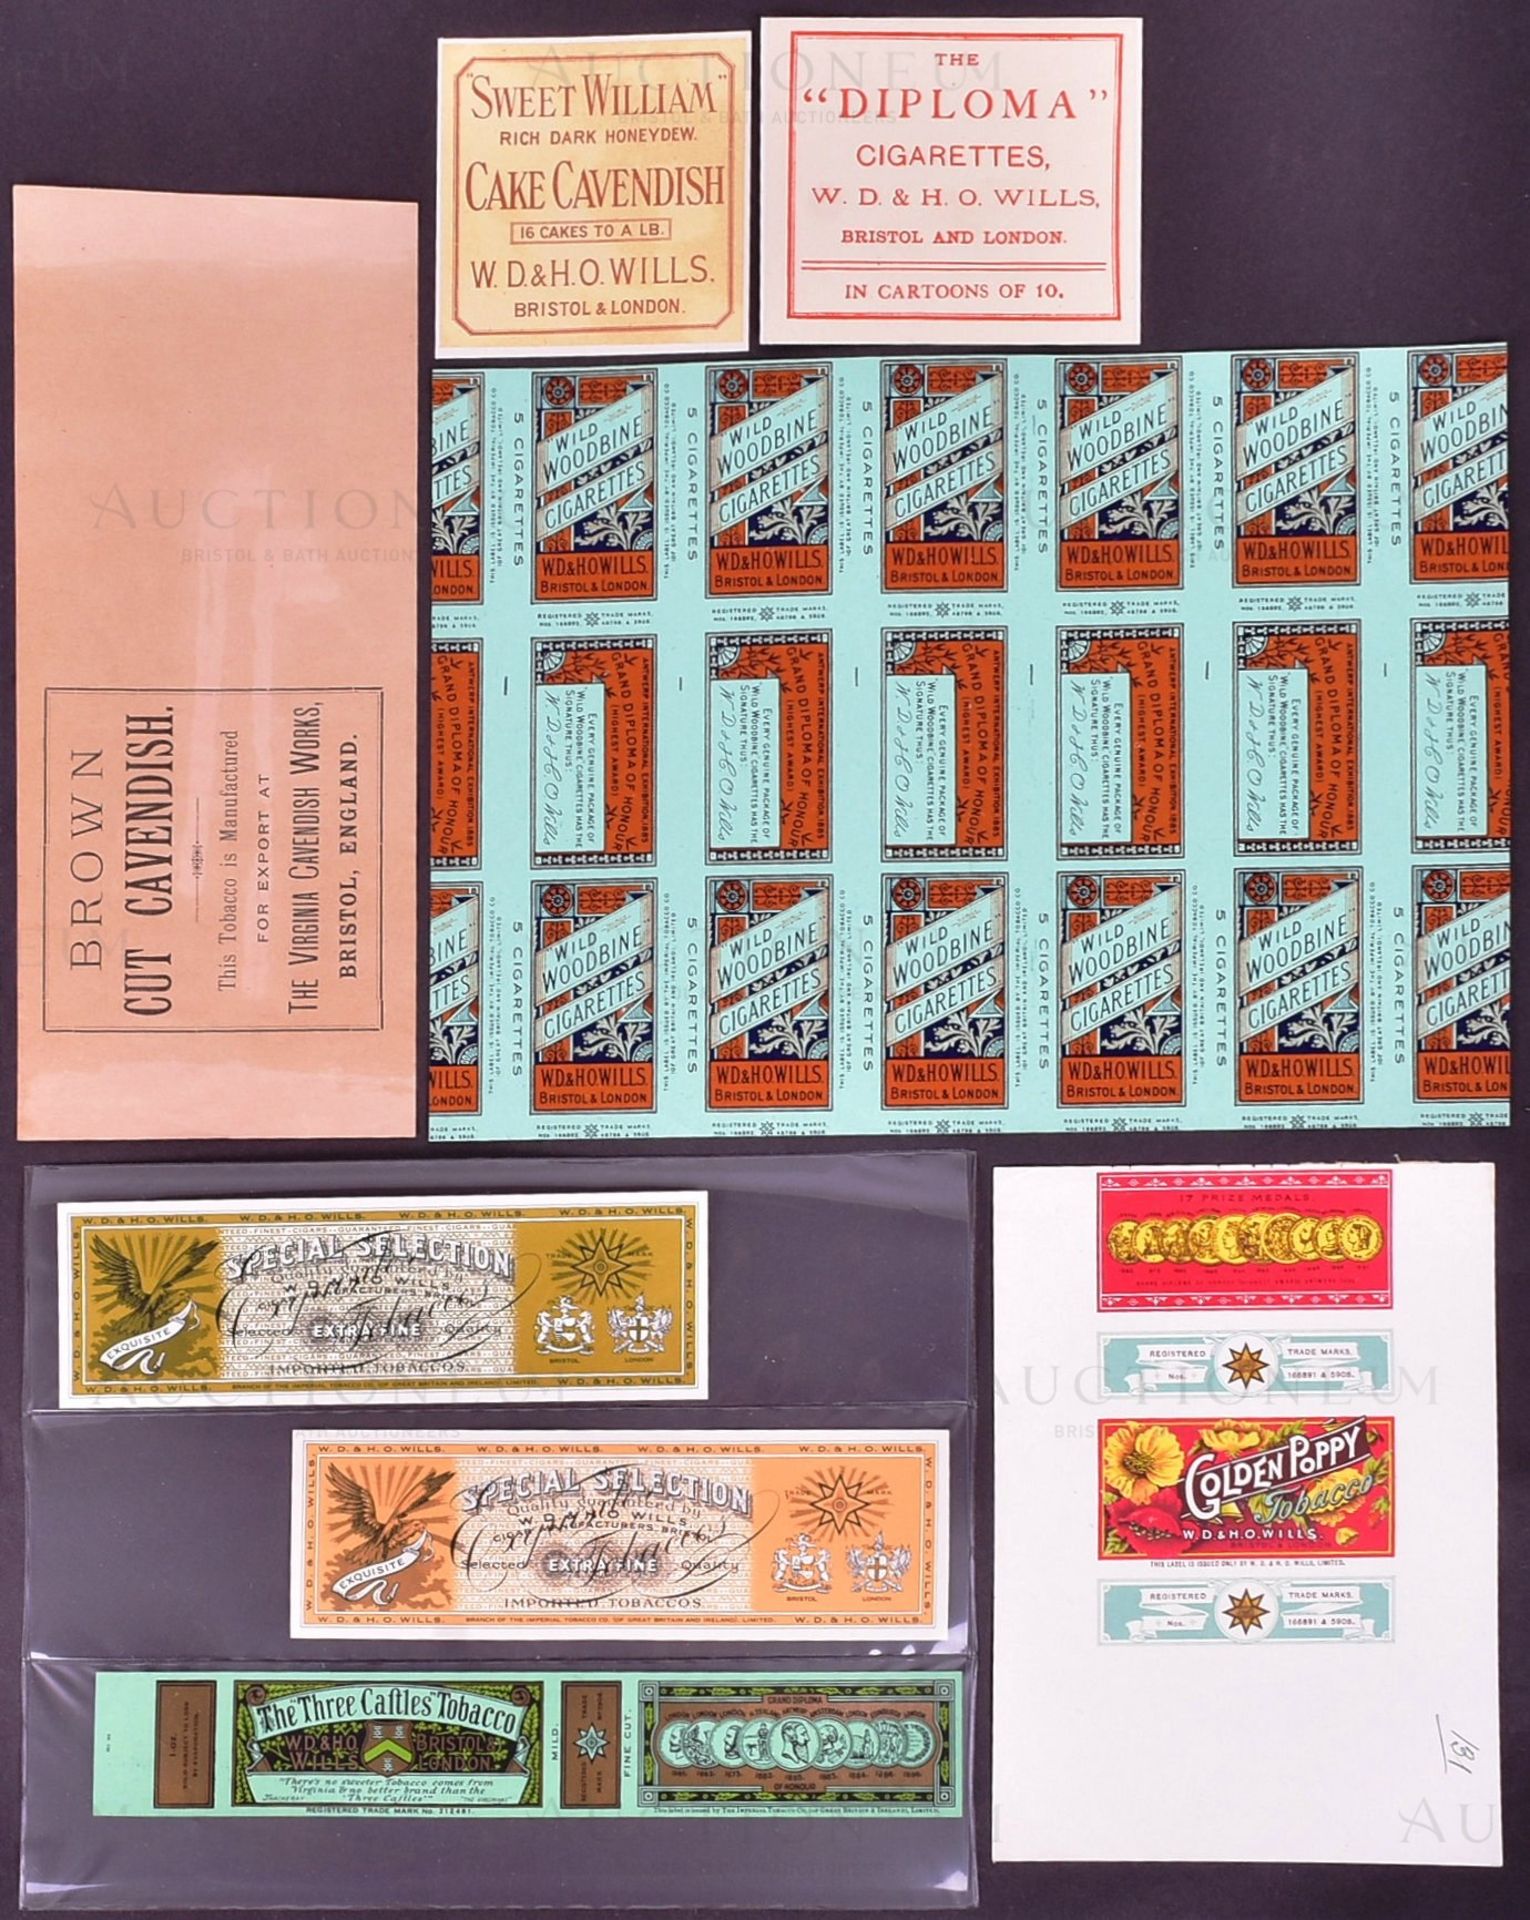 MARDON, SON & HALL - EARLY 20TH CENTURY CIGARETTE PACKET / LABEL DESIGNS